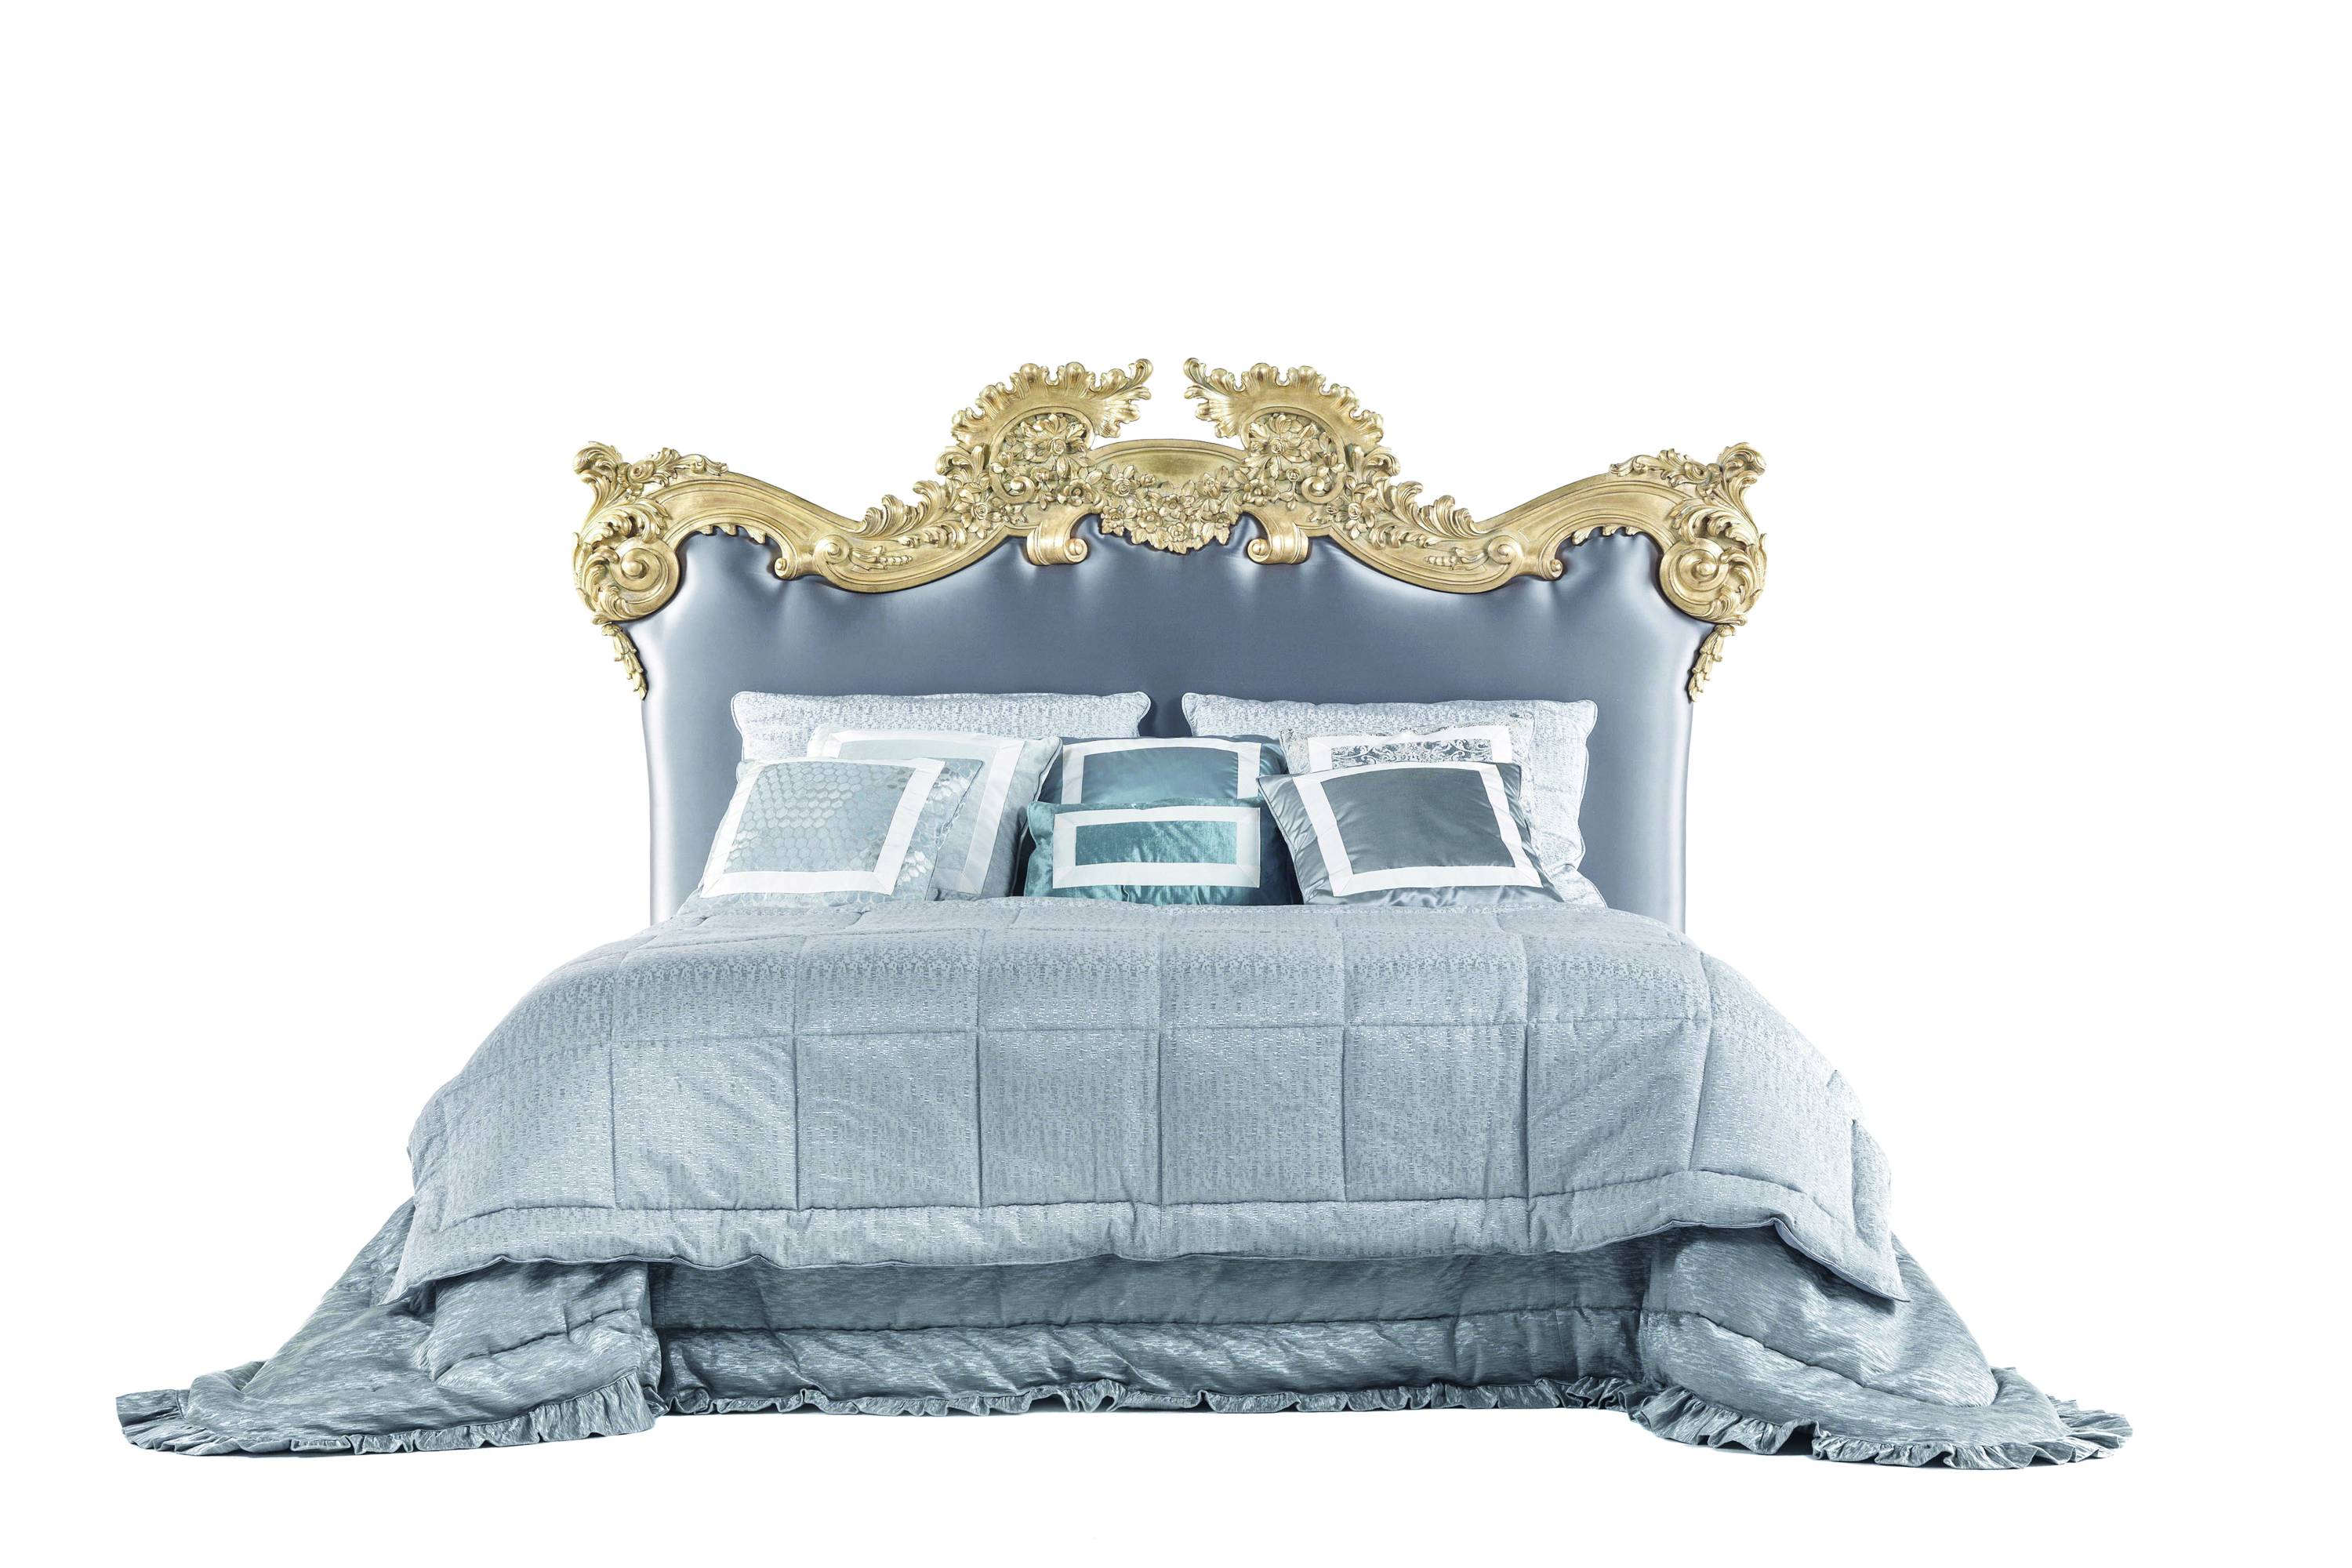 PLEASURE bed – Jumbo Collection Italian luxury classic BEDS. tailor-made interior design projects to meet all your furnishing needs